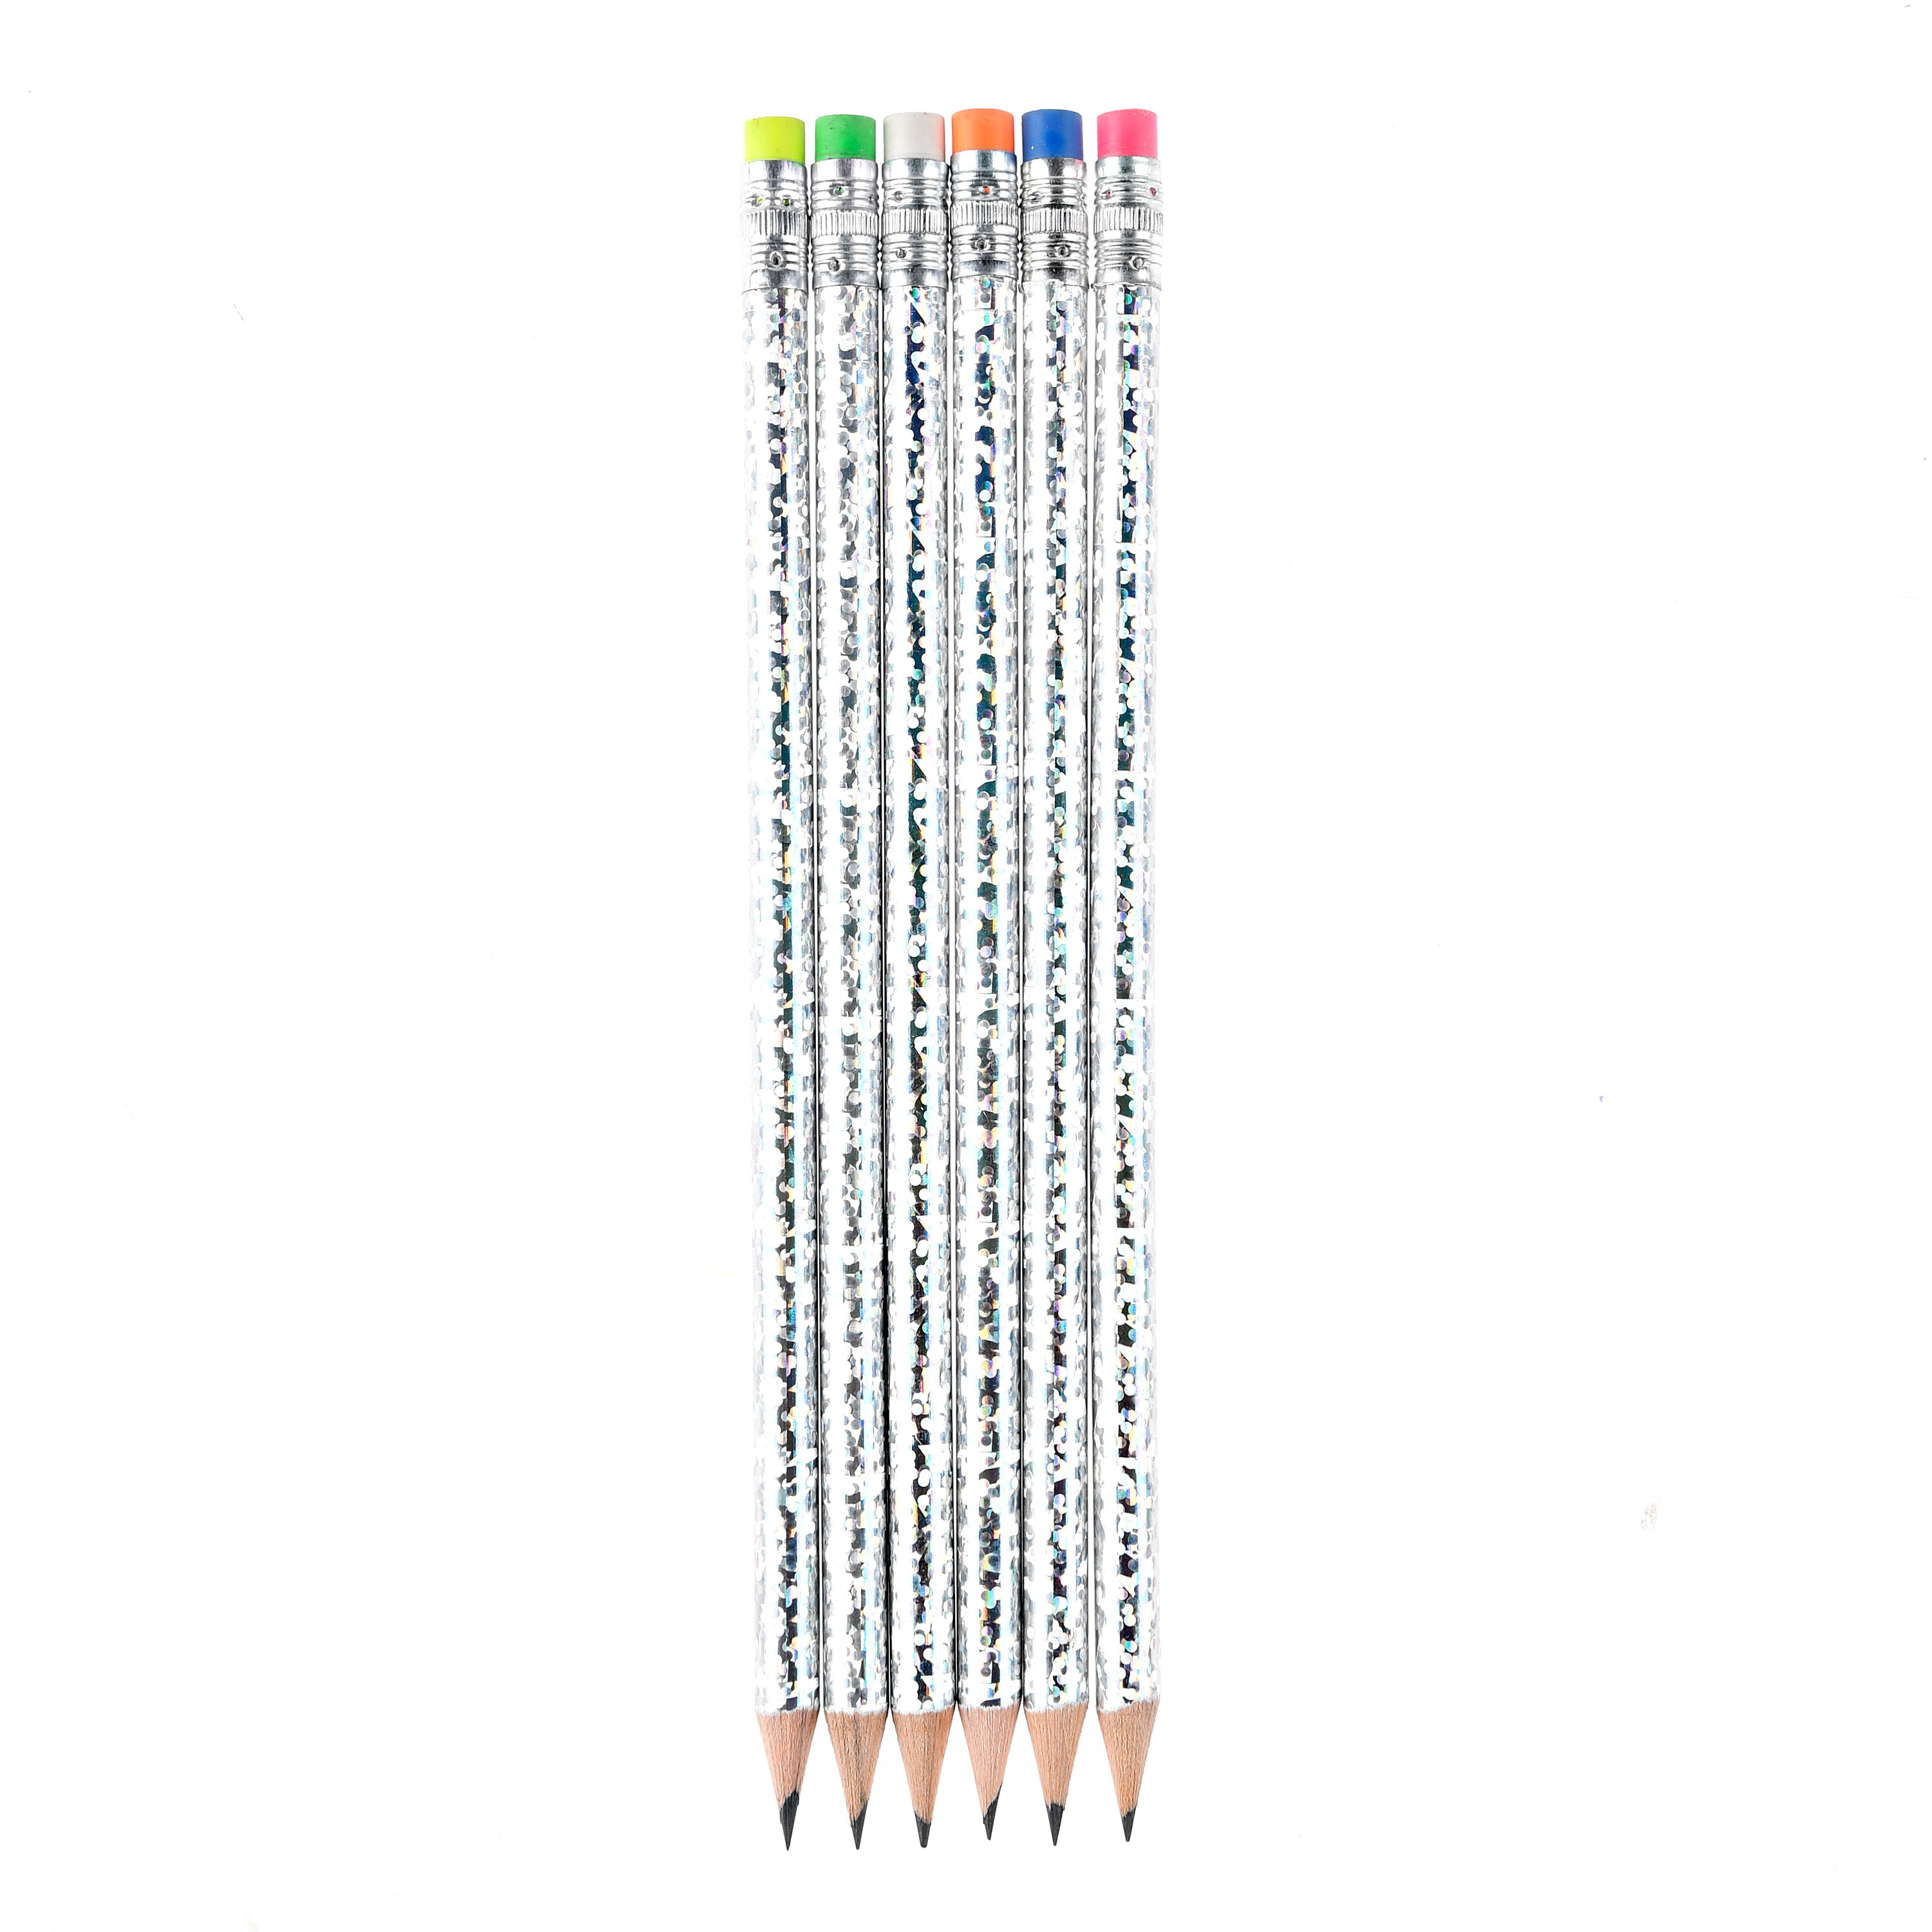 Pen + Gear No. 2 Wood Pencils, Holographic, Sharpened, 12 Count - image 4 of 5